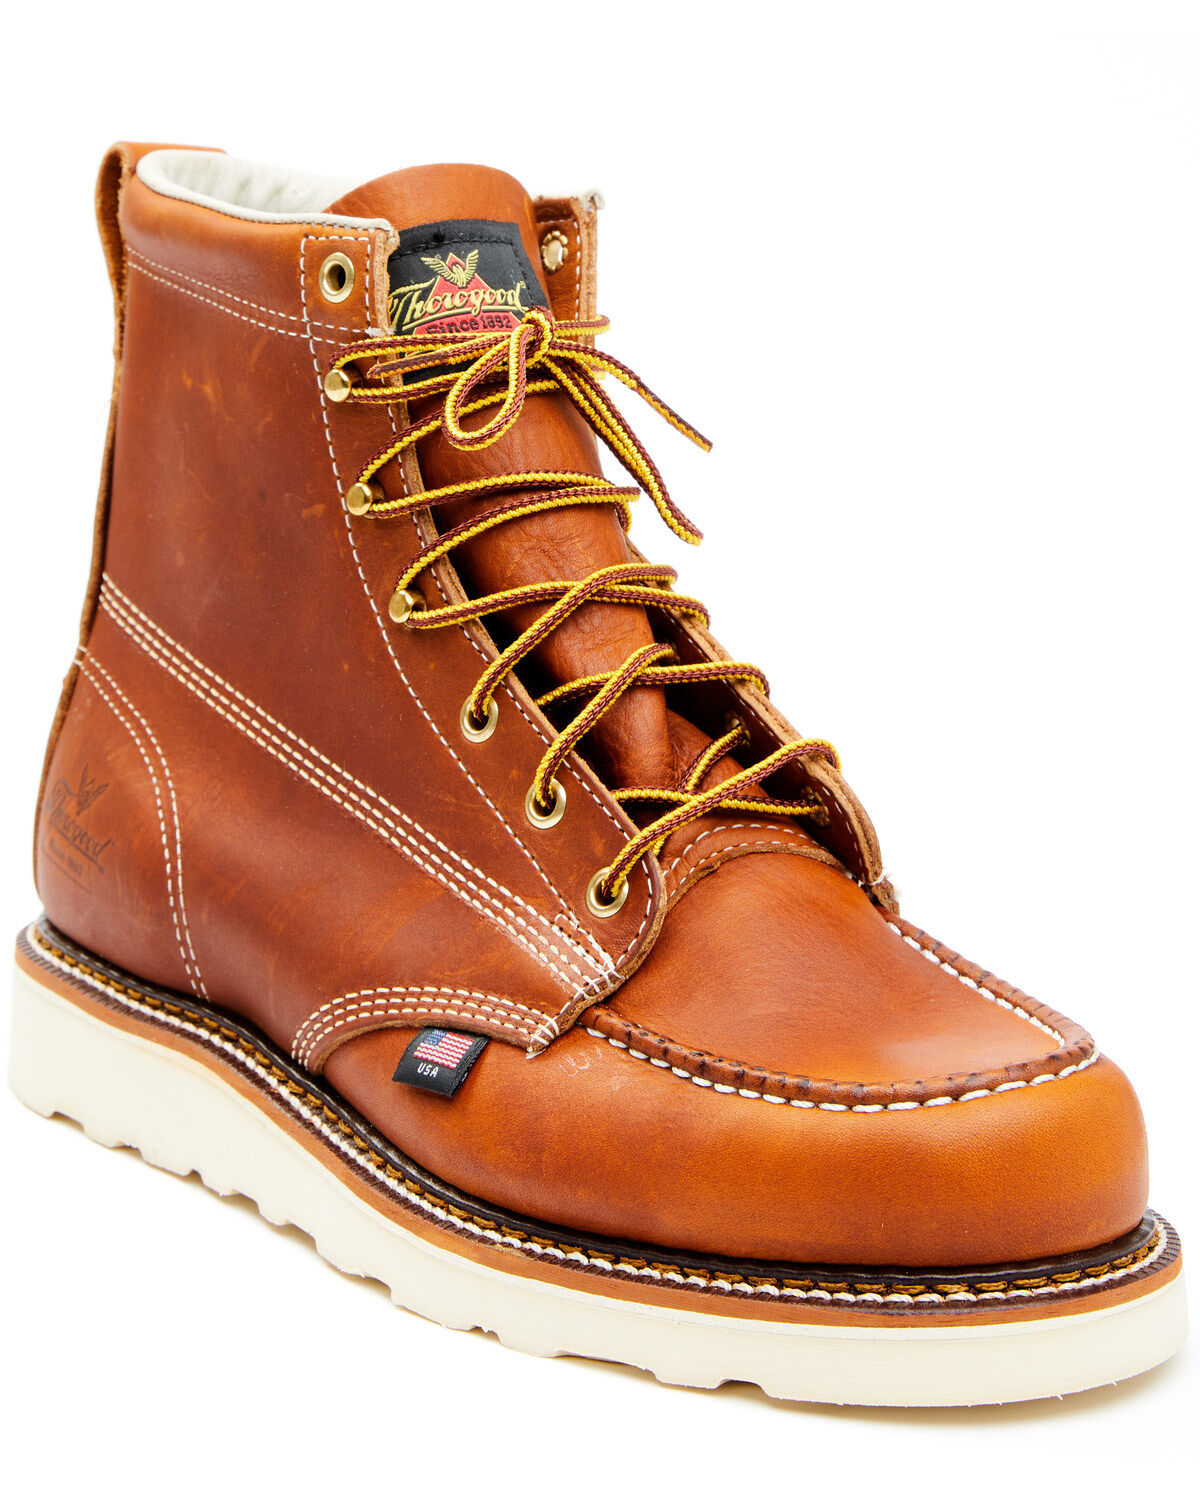 Work Boot 6in Sttoe Action 10 No 655ss-10 Diamondback for sale online 